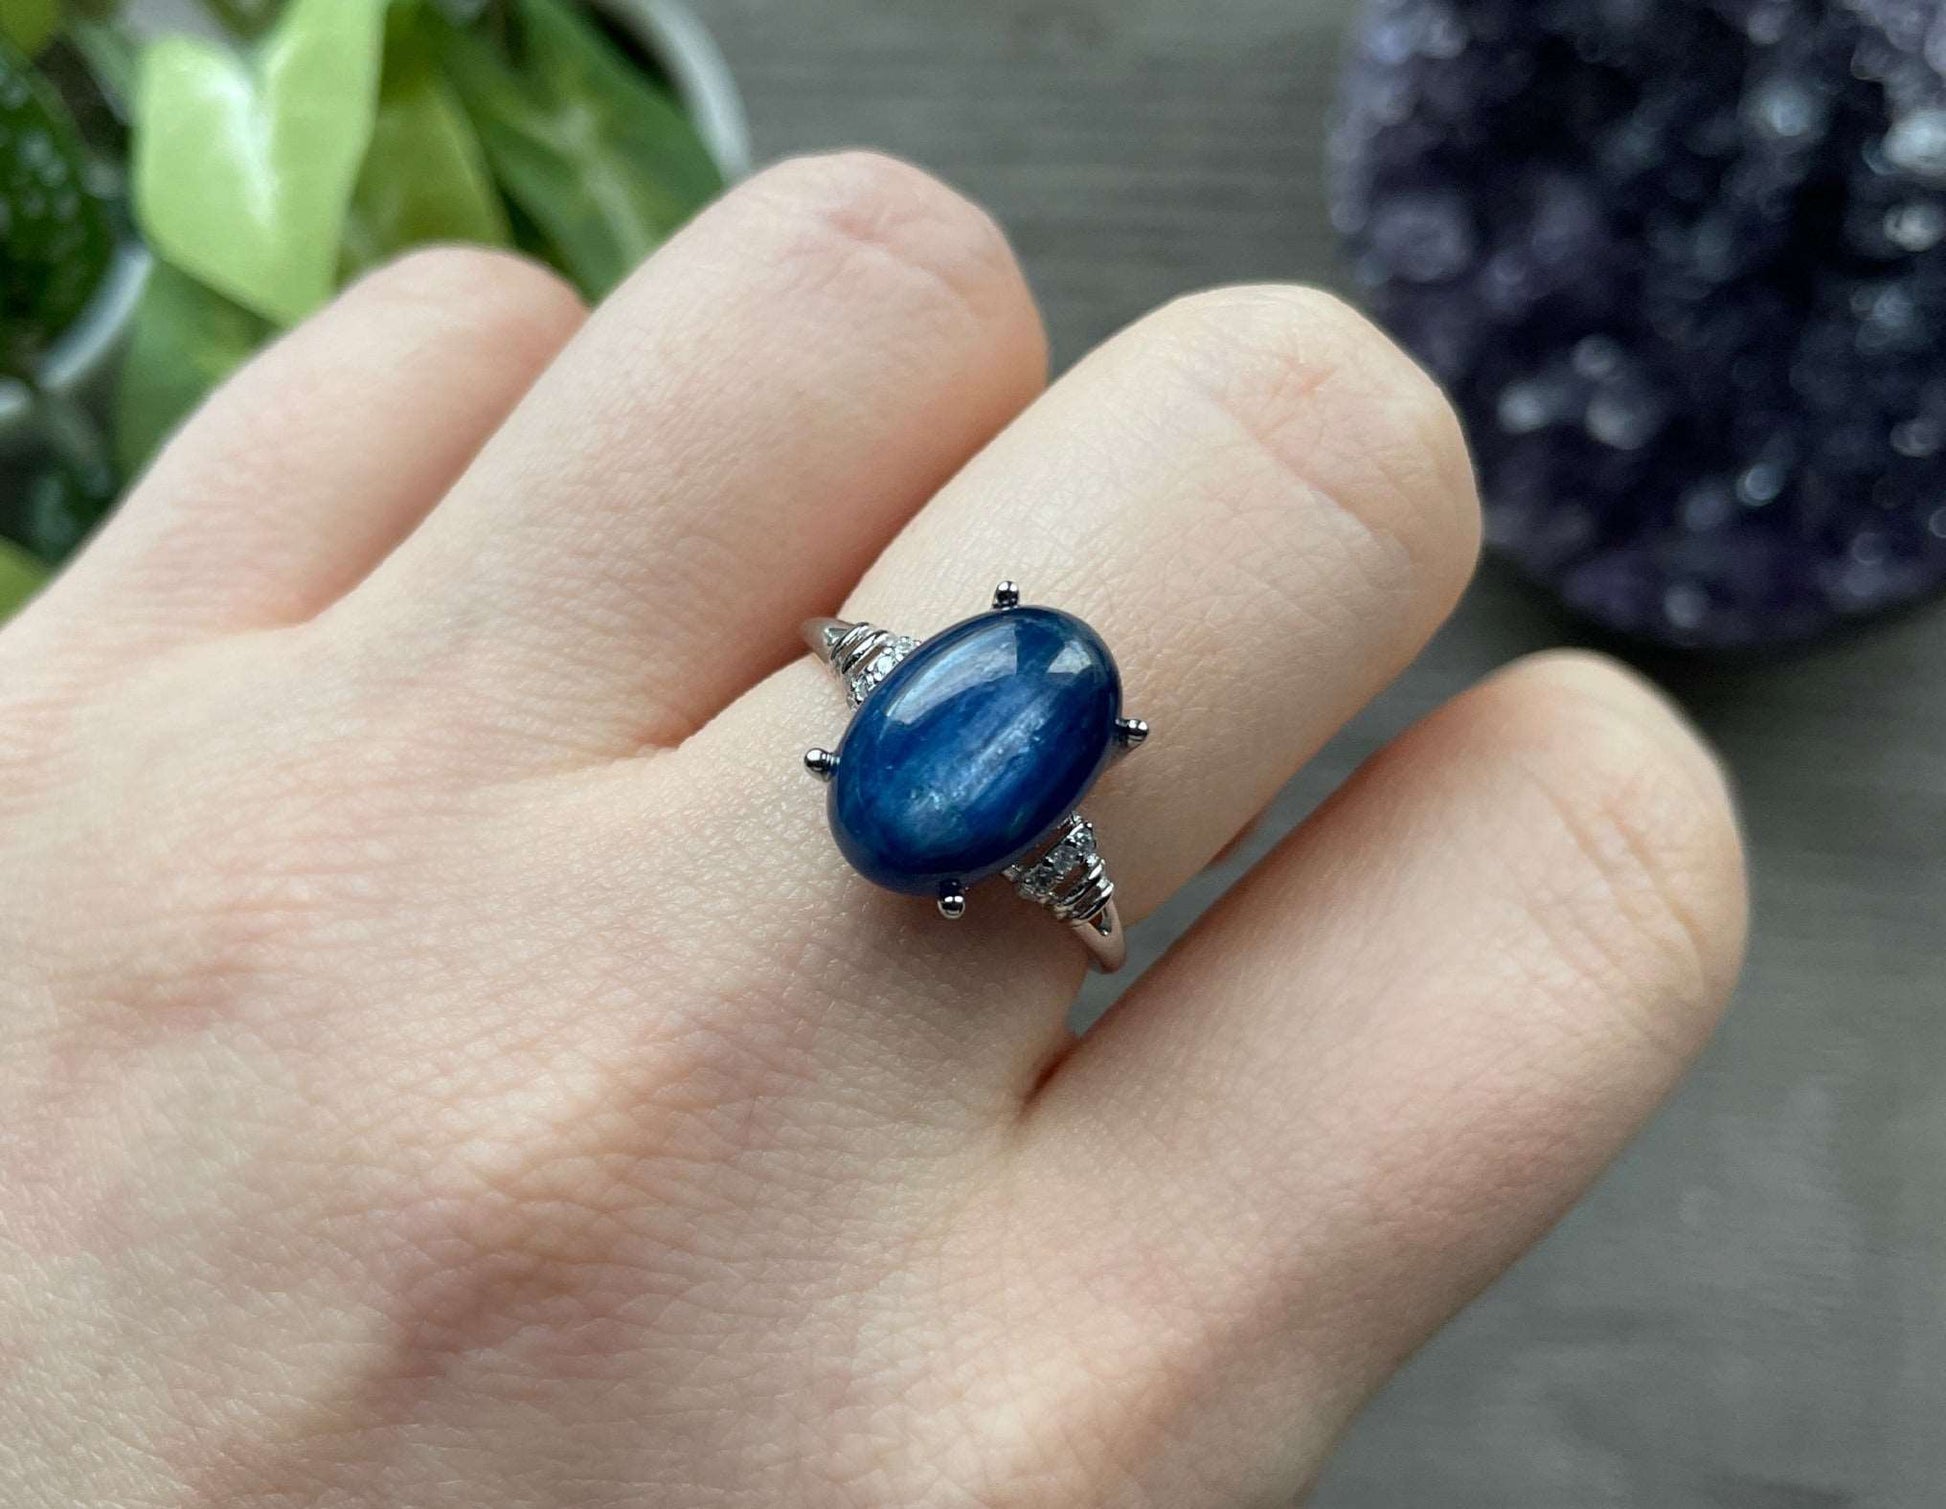 Pictured is a blue kyanite gemstone set in an S925 sterling silver ring.